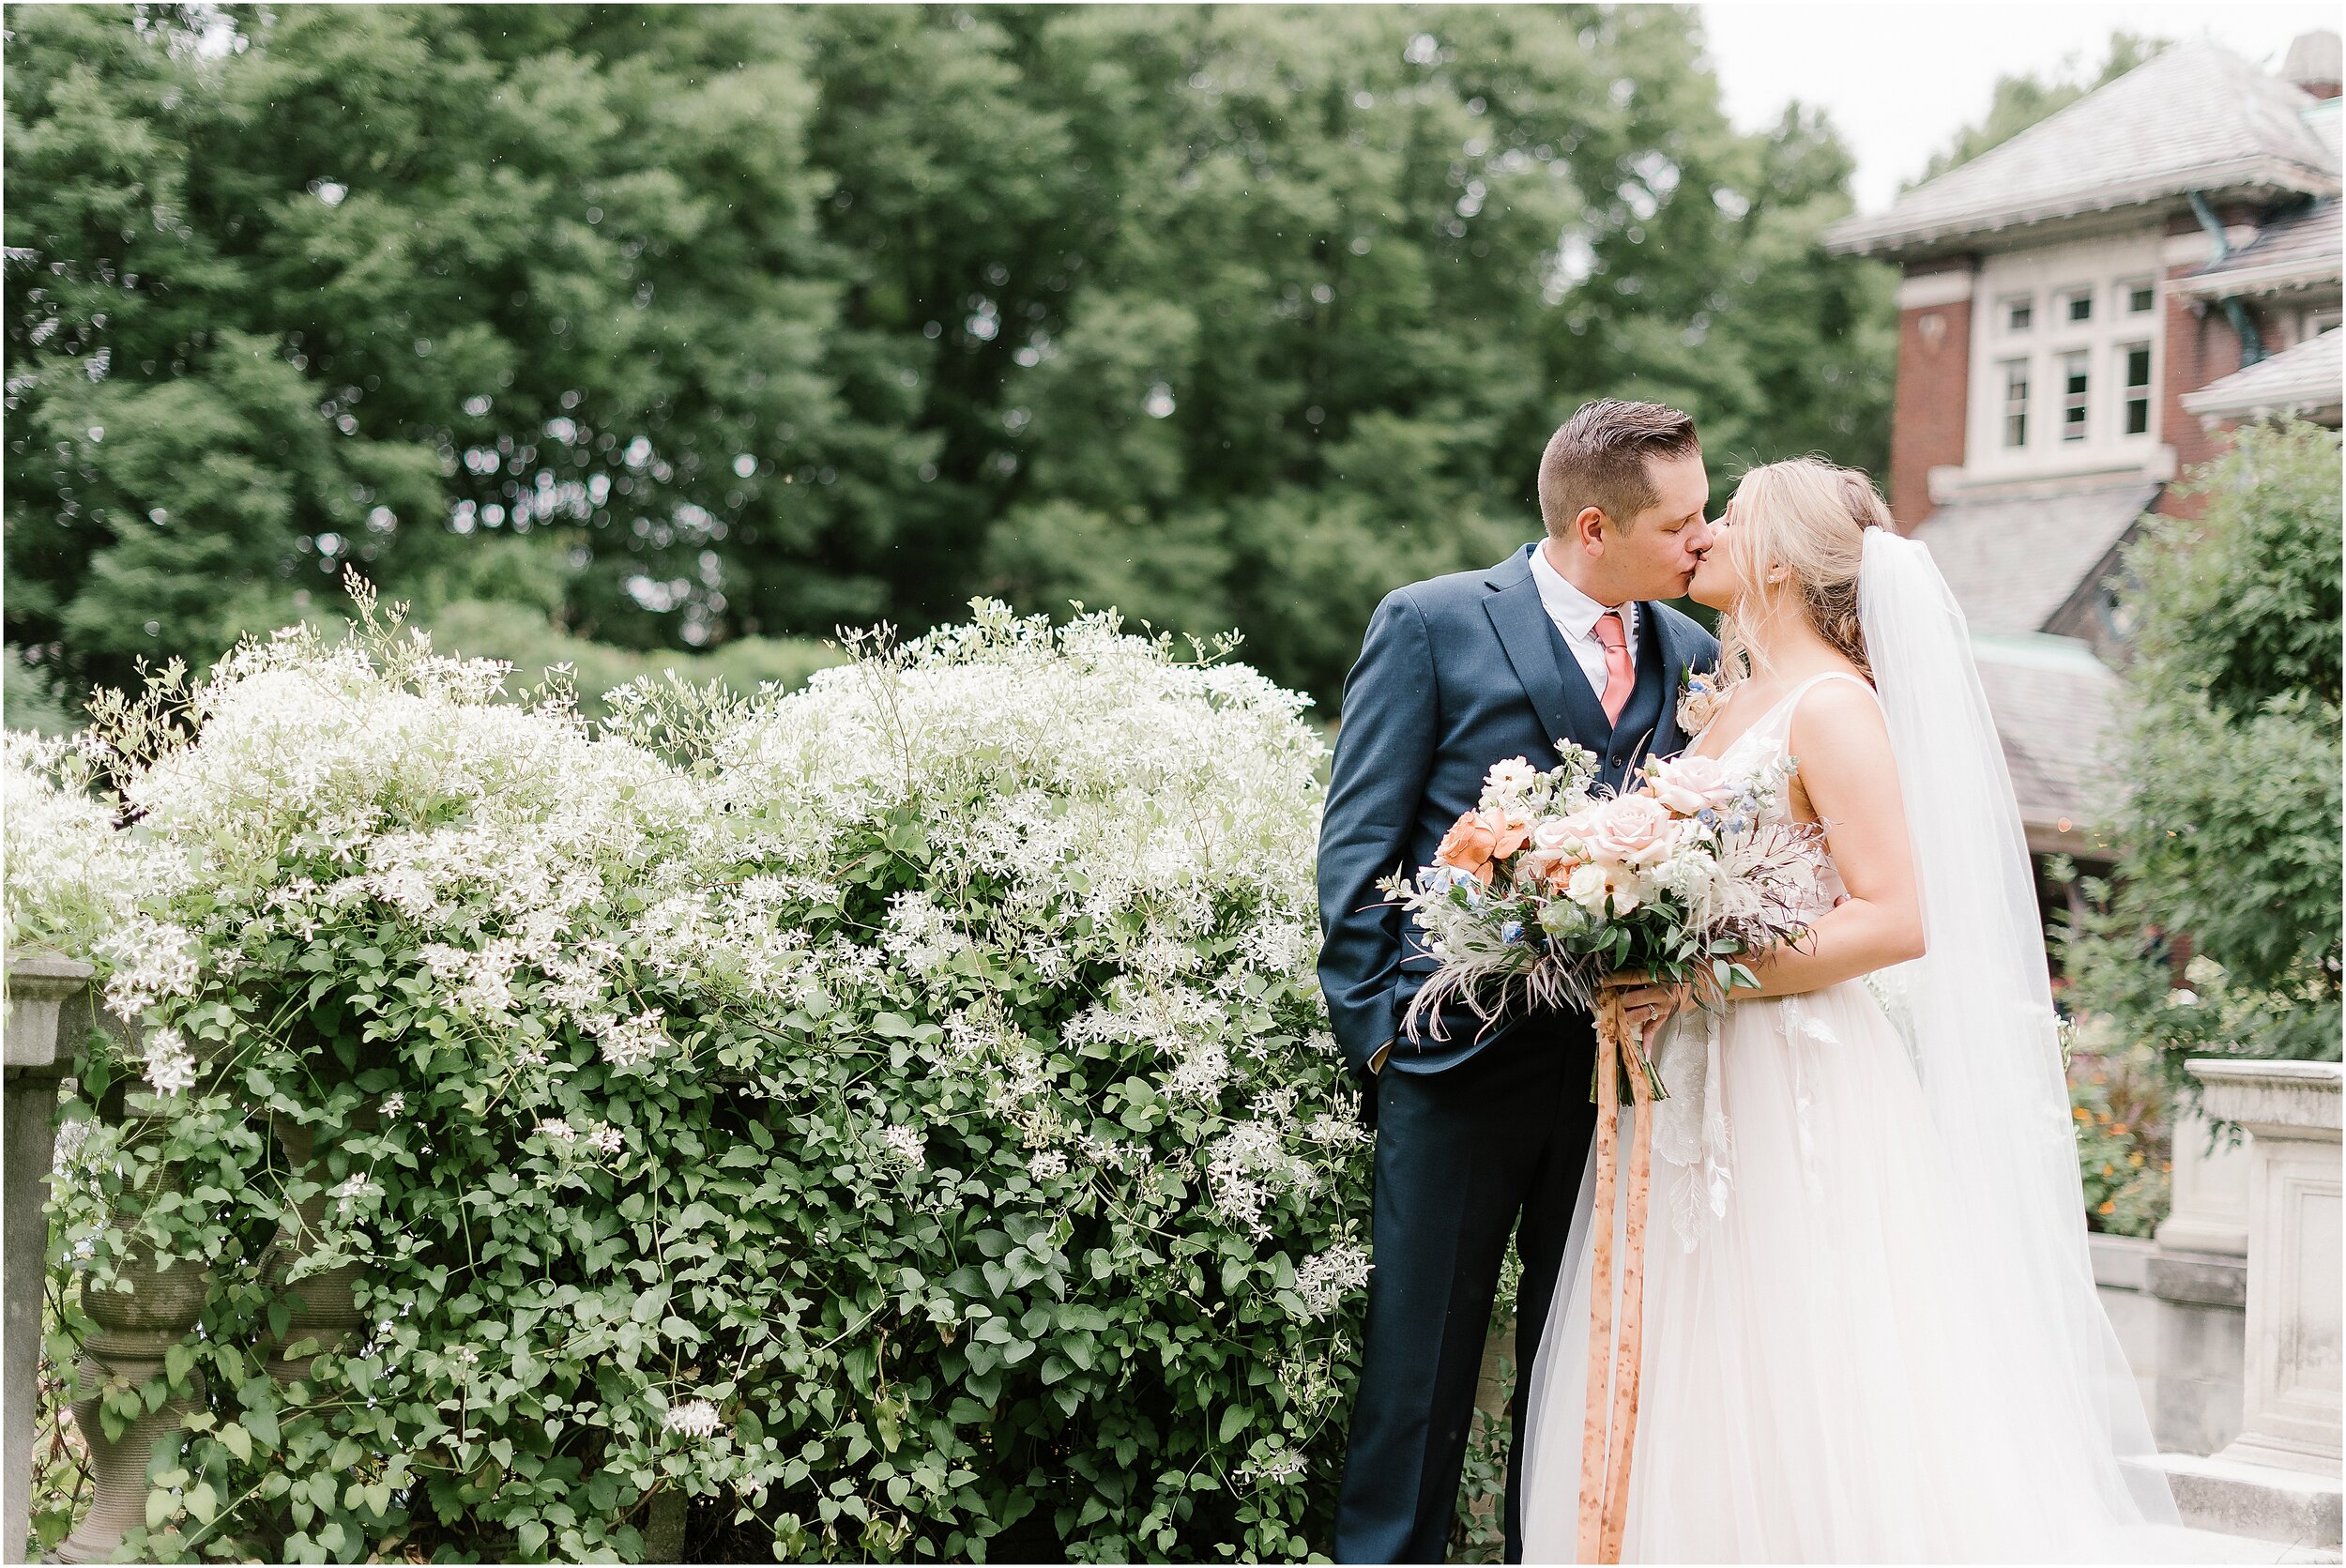 Rebecca Shehorn Photography Colleen and Kyle Inn at Irwin Gardens Wedding-364_The Commons Columbus Inn at Irwin Garden Indianapolis Wedding Photographer.jpg